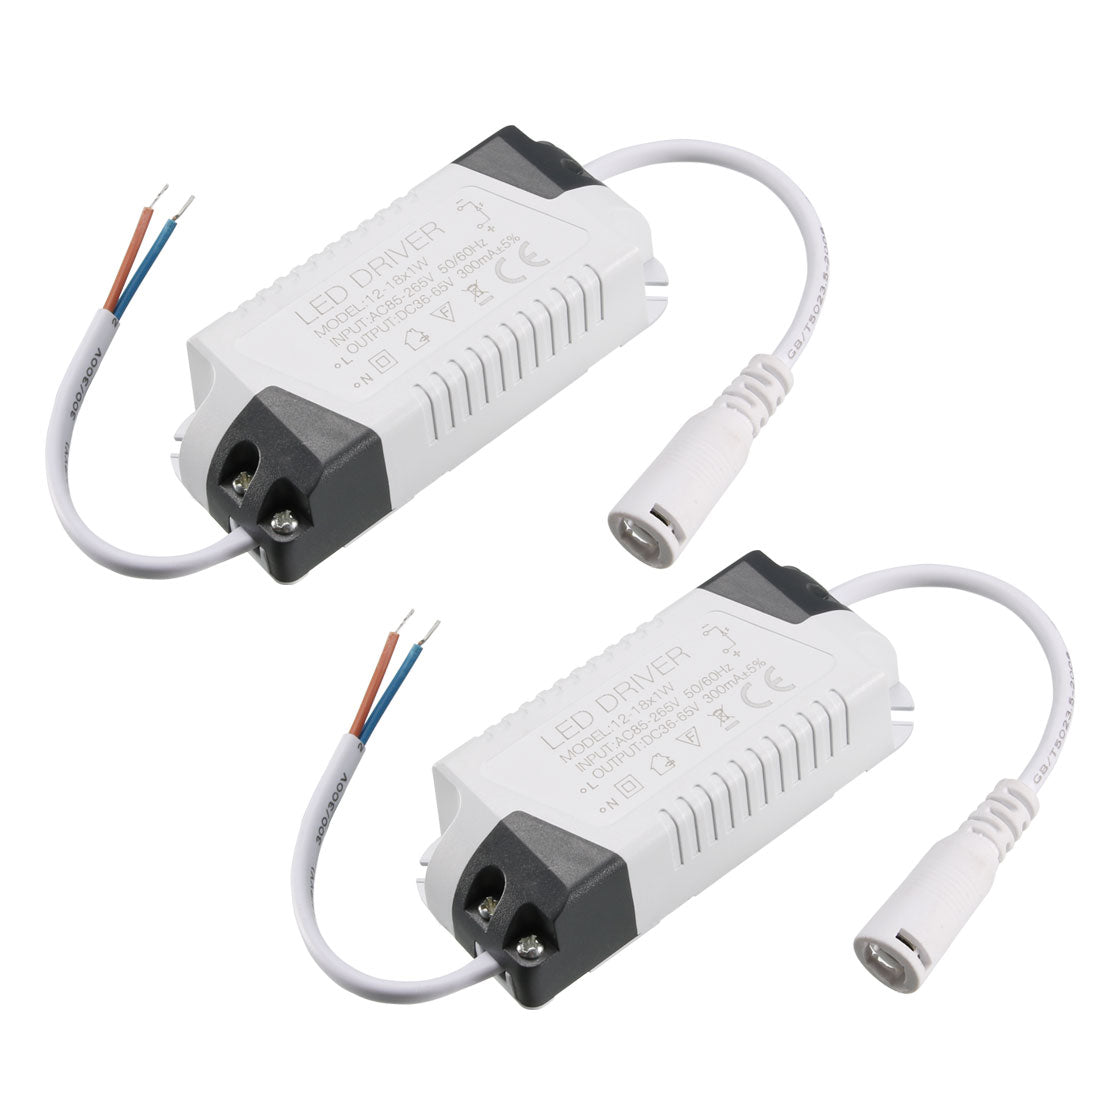 uxcell Uxcell 12-18W Constant Current 300mA High Power LED Driver AC 85-265V Output 36-65V DC Connector External Power Supply LED Ceiling Lamp Transformer 2Pcs